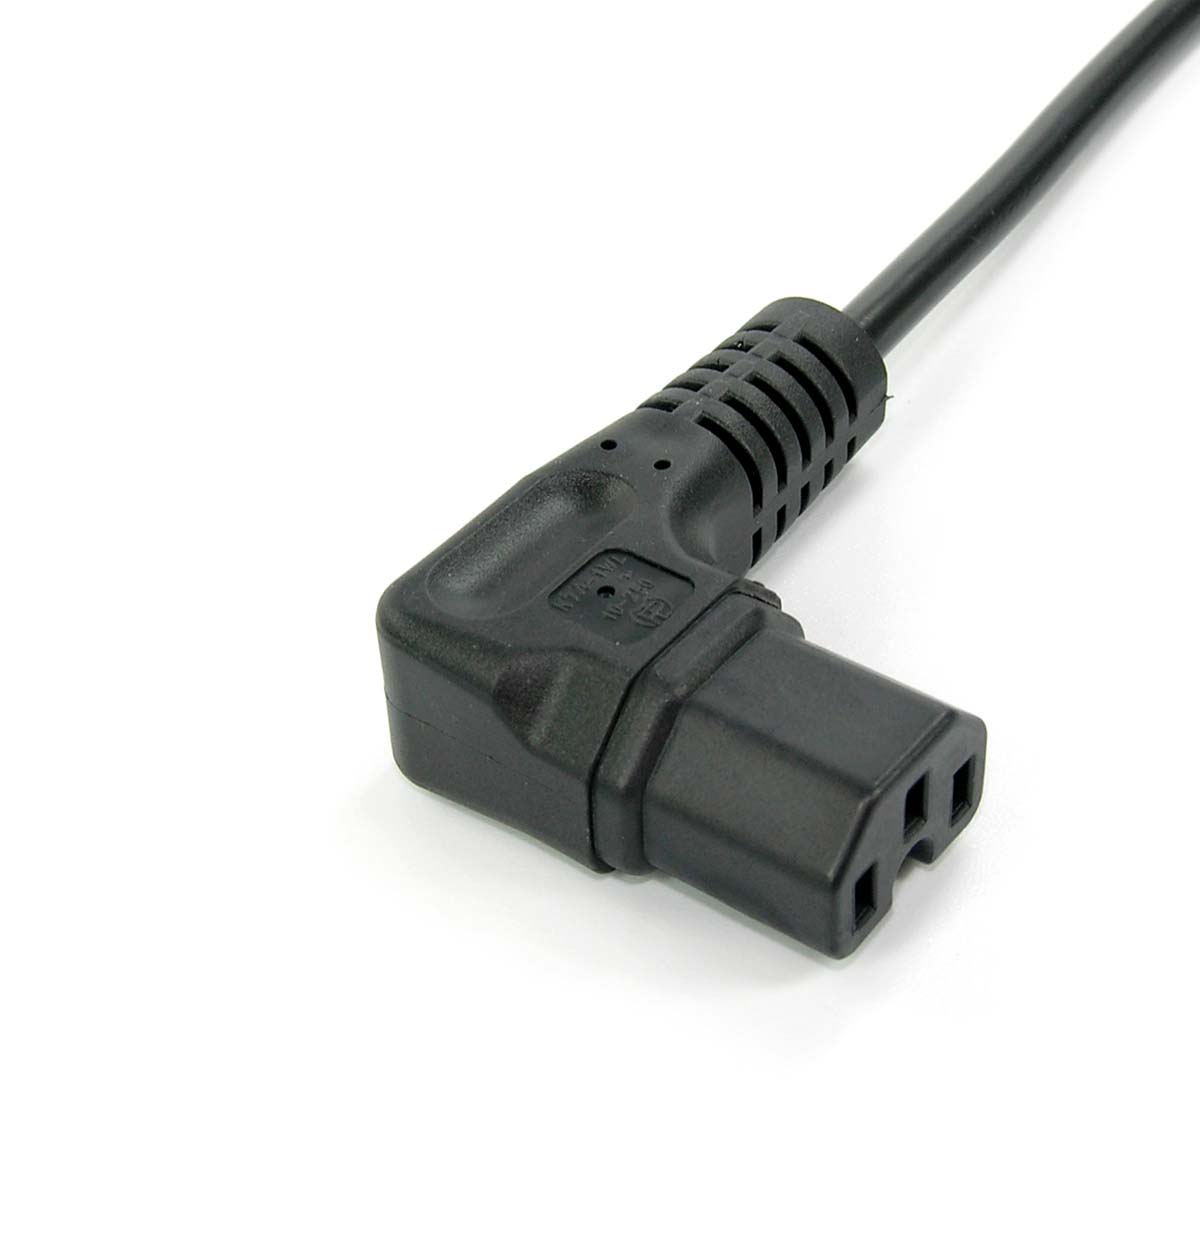 W7A-1WL angled  appliance connector for higher temperature devices